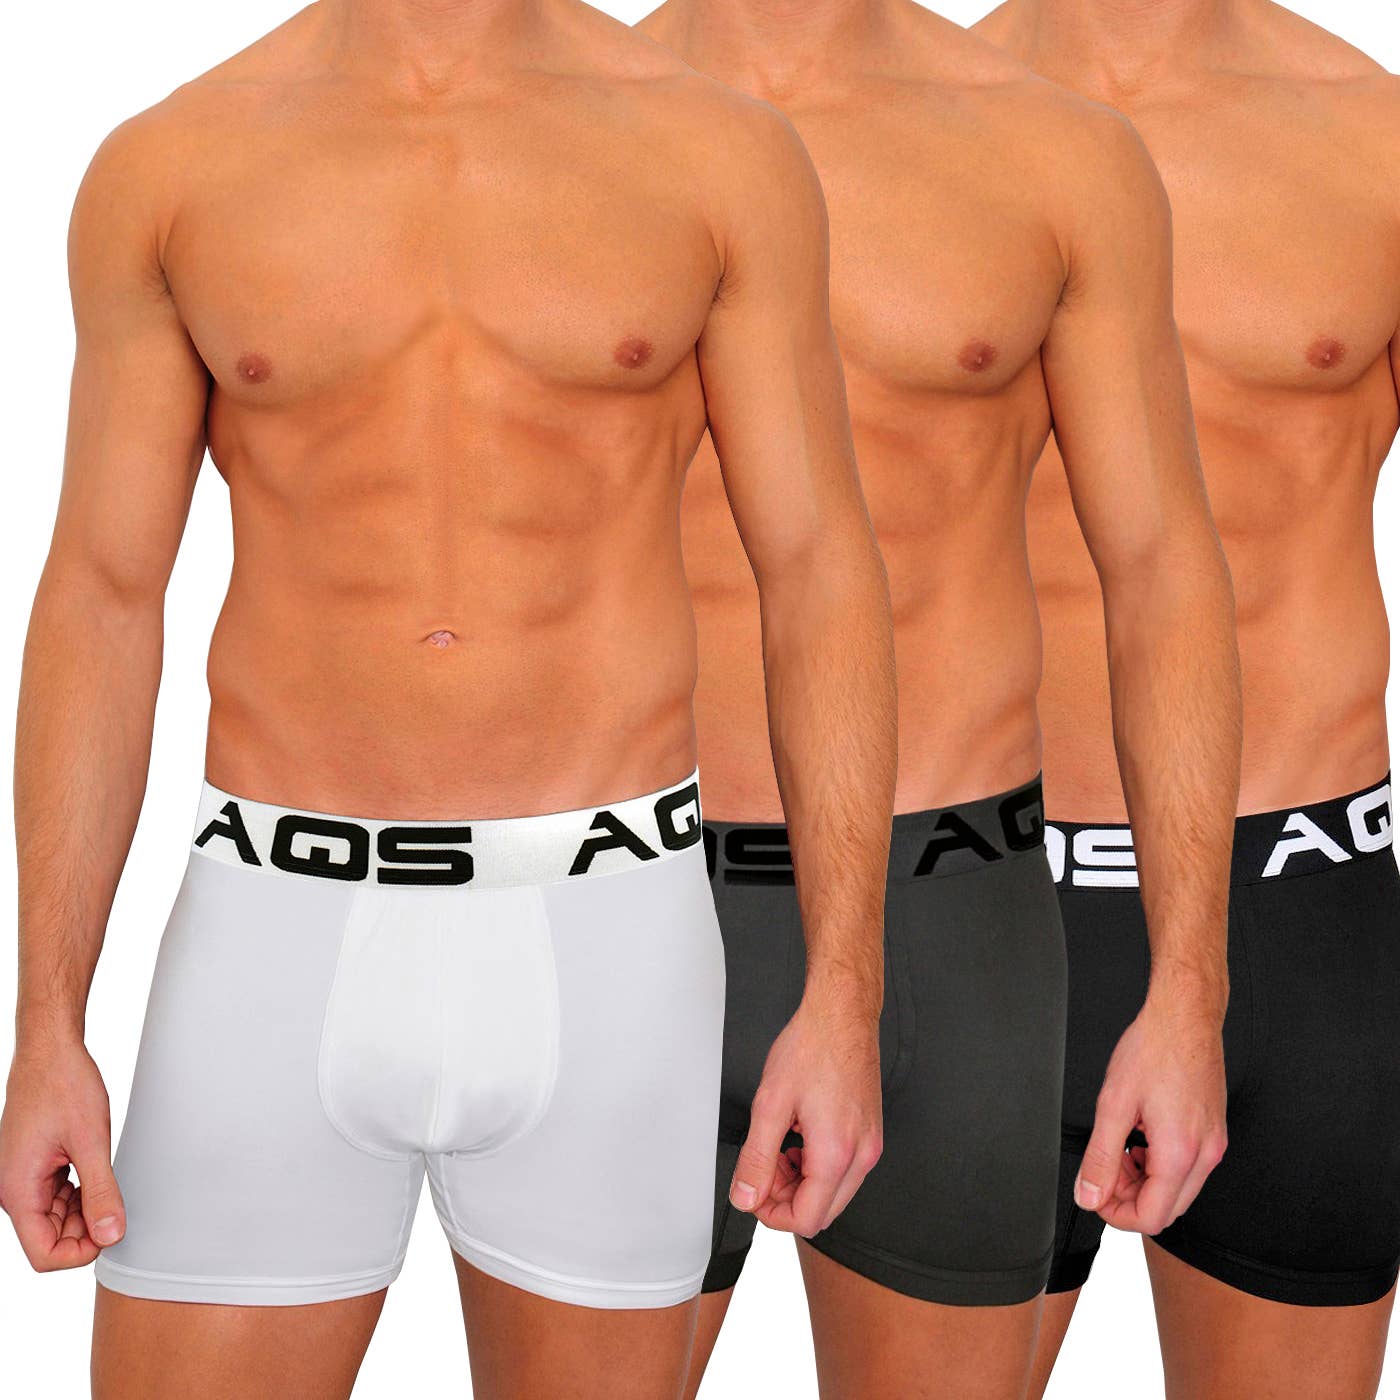 AQS Brand Inc. wholesale products